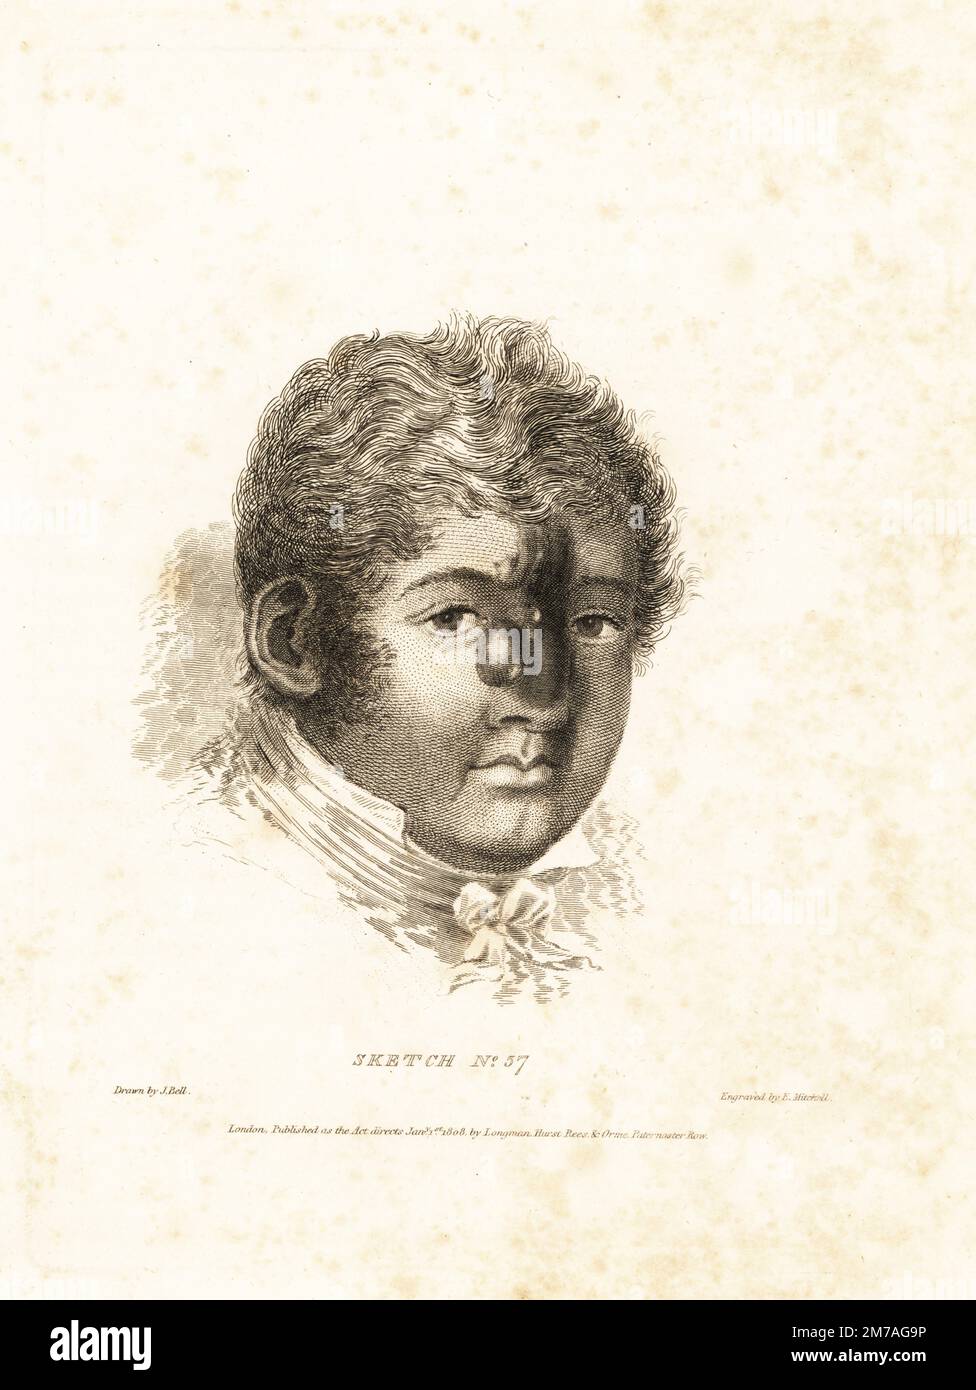 Fatal cancerous tumor on the face of a gentleman from Birmingham. Grew from a small speck to a large pulsating, bleeding tumor over nine years. According to doctor George Freer, the patient declined treatment and died of hemorrhagy. Copperplate engraving by Edward Mitchell after an illustration by John Bell from his own Principles of Surgery, as they Relate to Wounds, Ulcers and Fistulas, Longman,  Hurst, Rees, Orme and Brown, London, 1815. Stock Photo